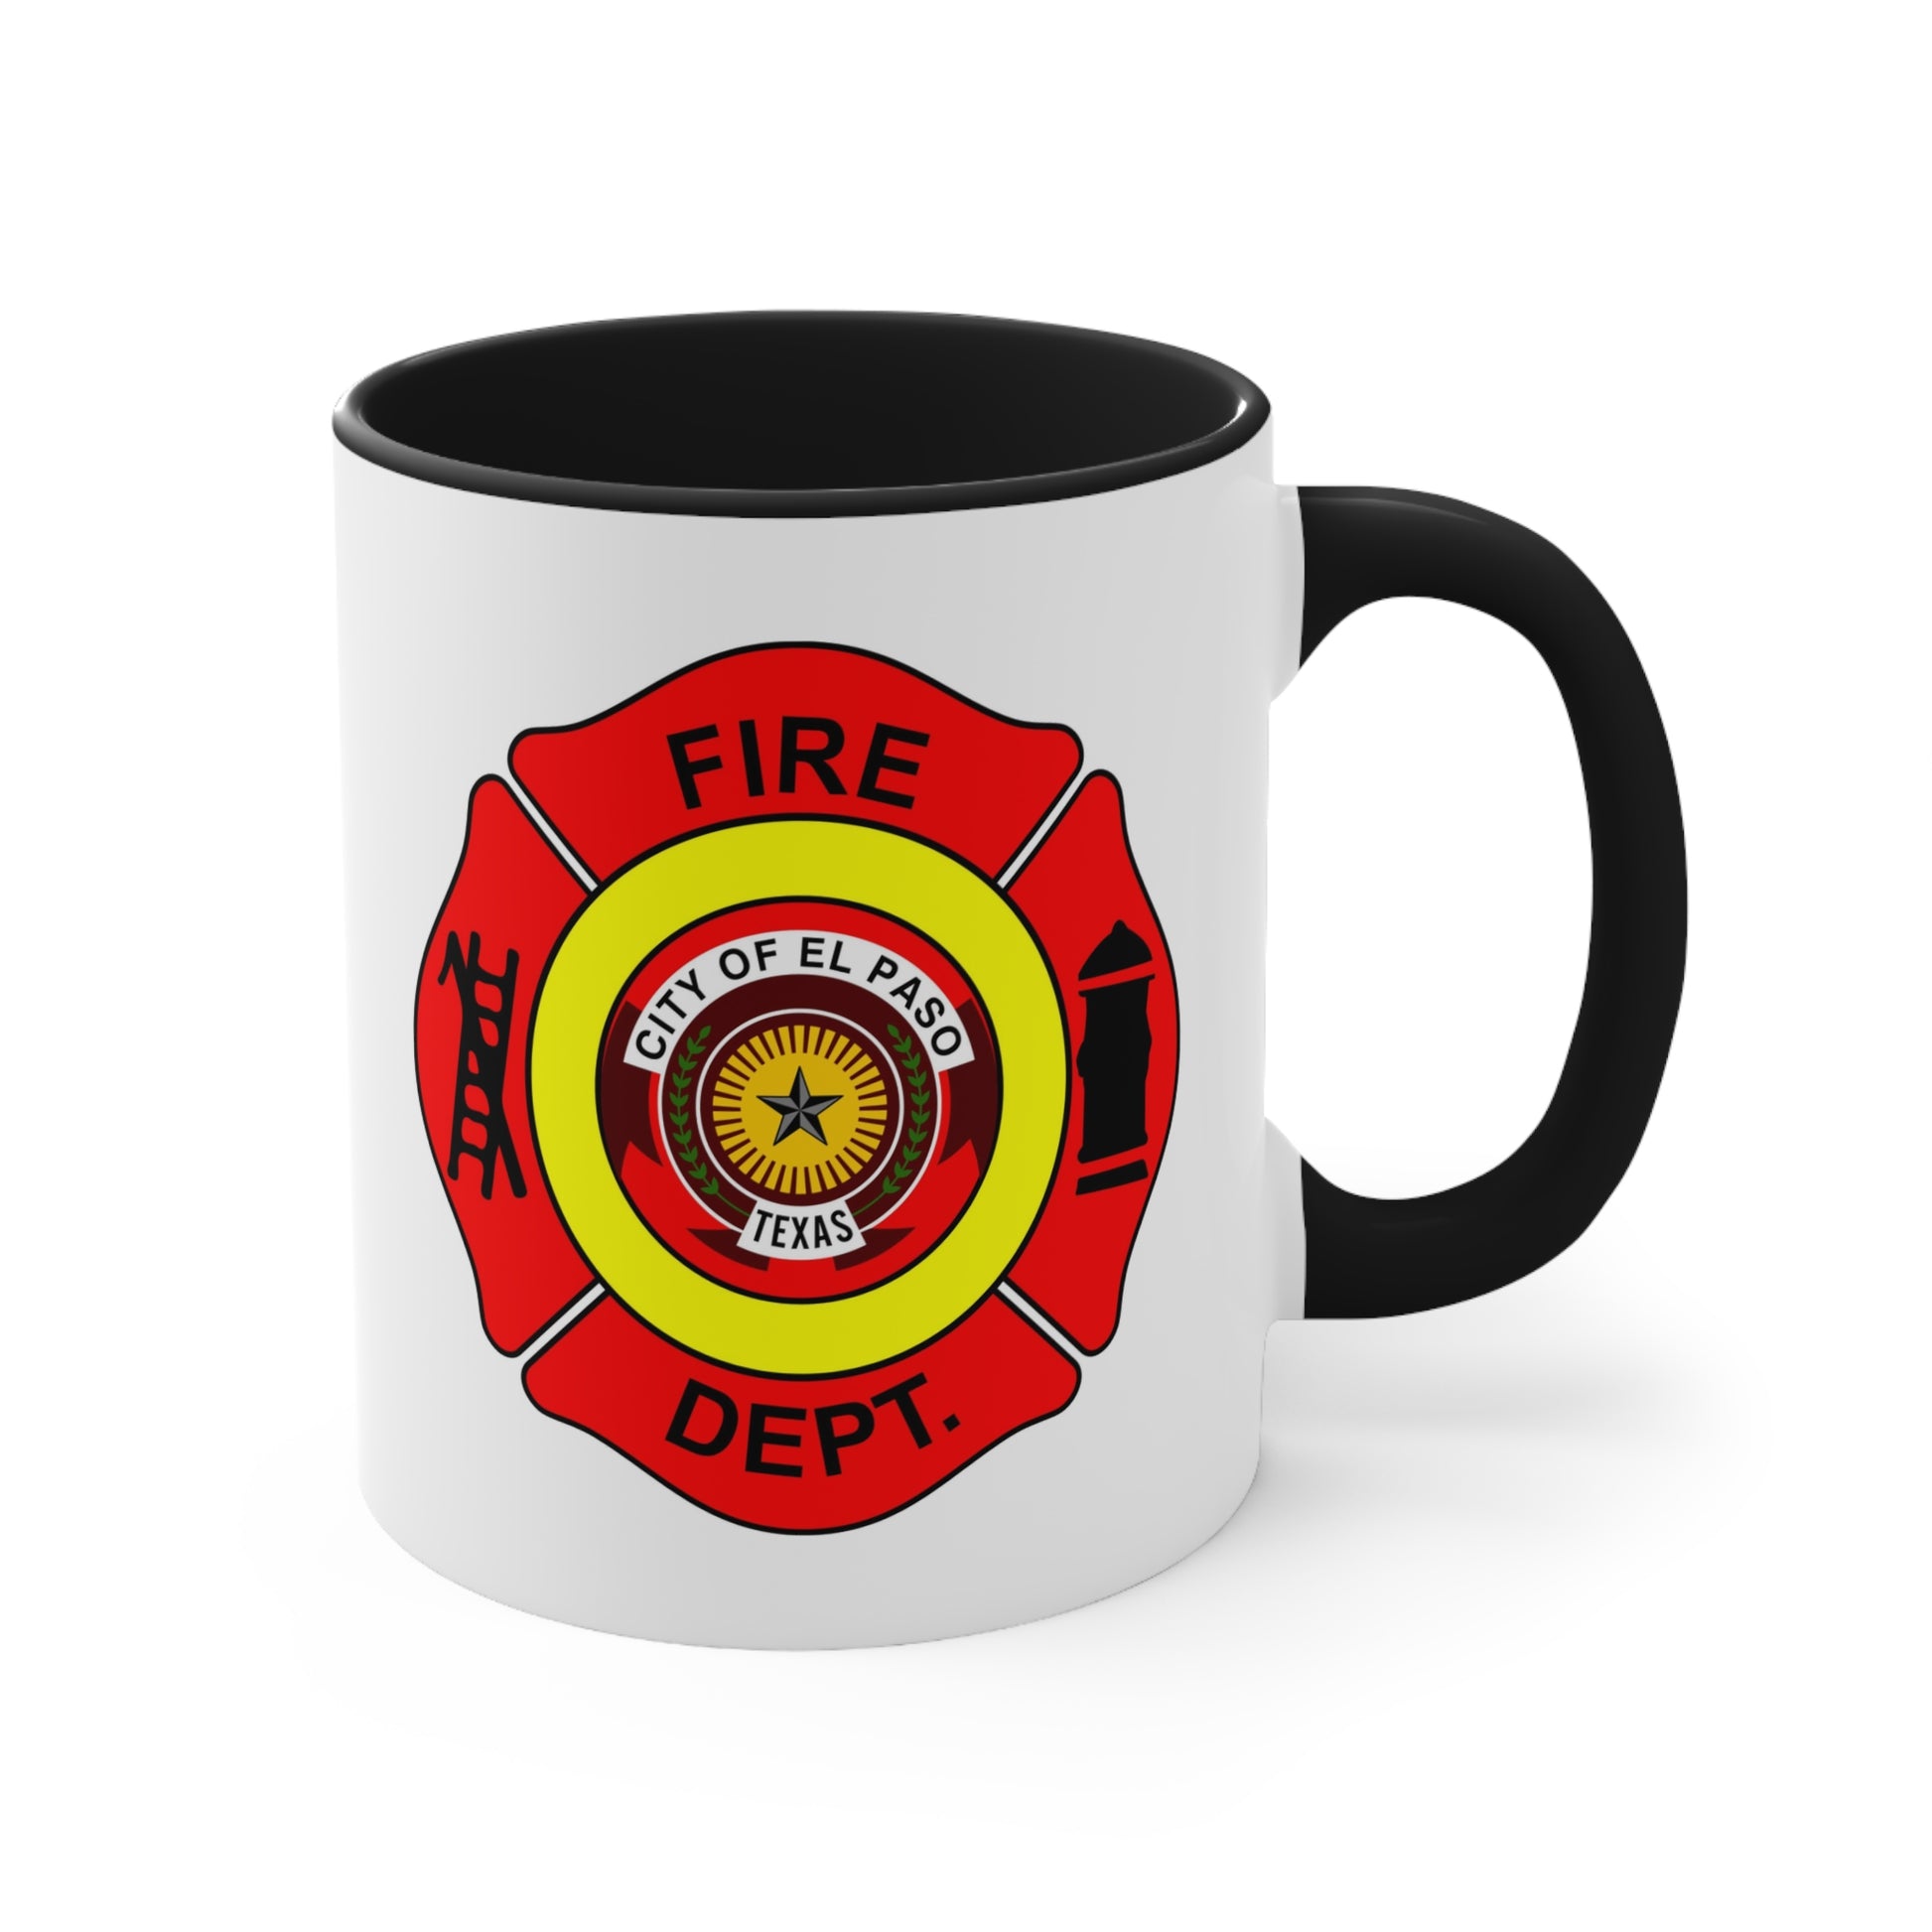 El Paso Fire Department Coffee Mug - Double Sided Black Accent White Ceramic 11oz by TheGlassyLass